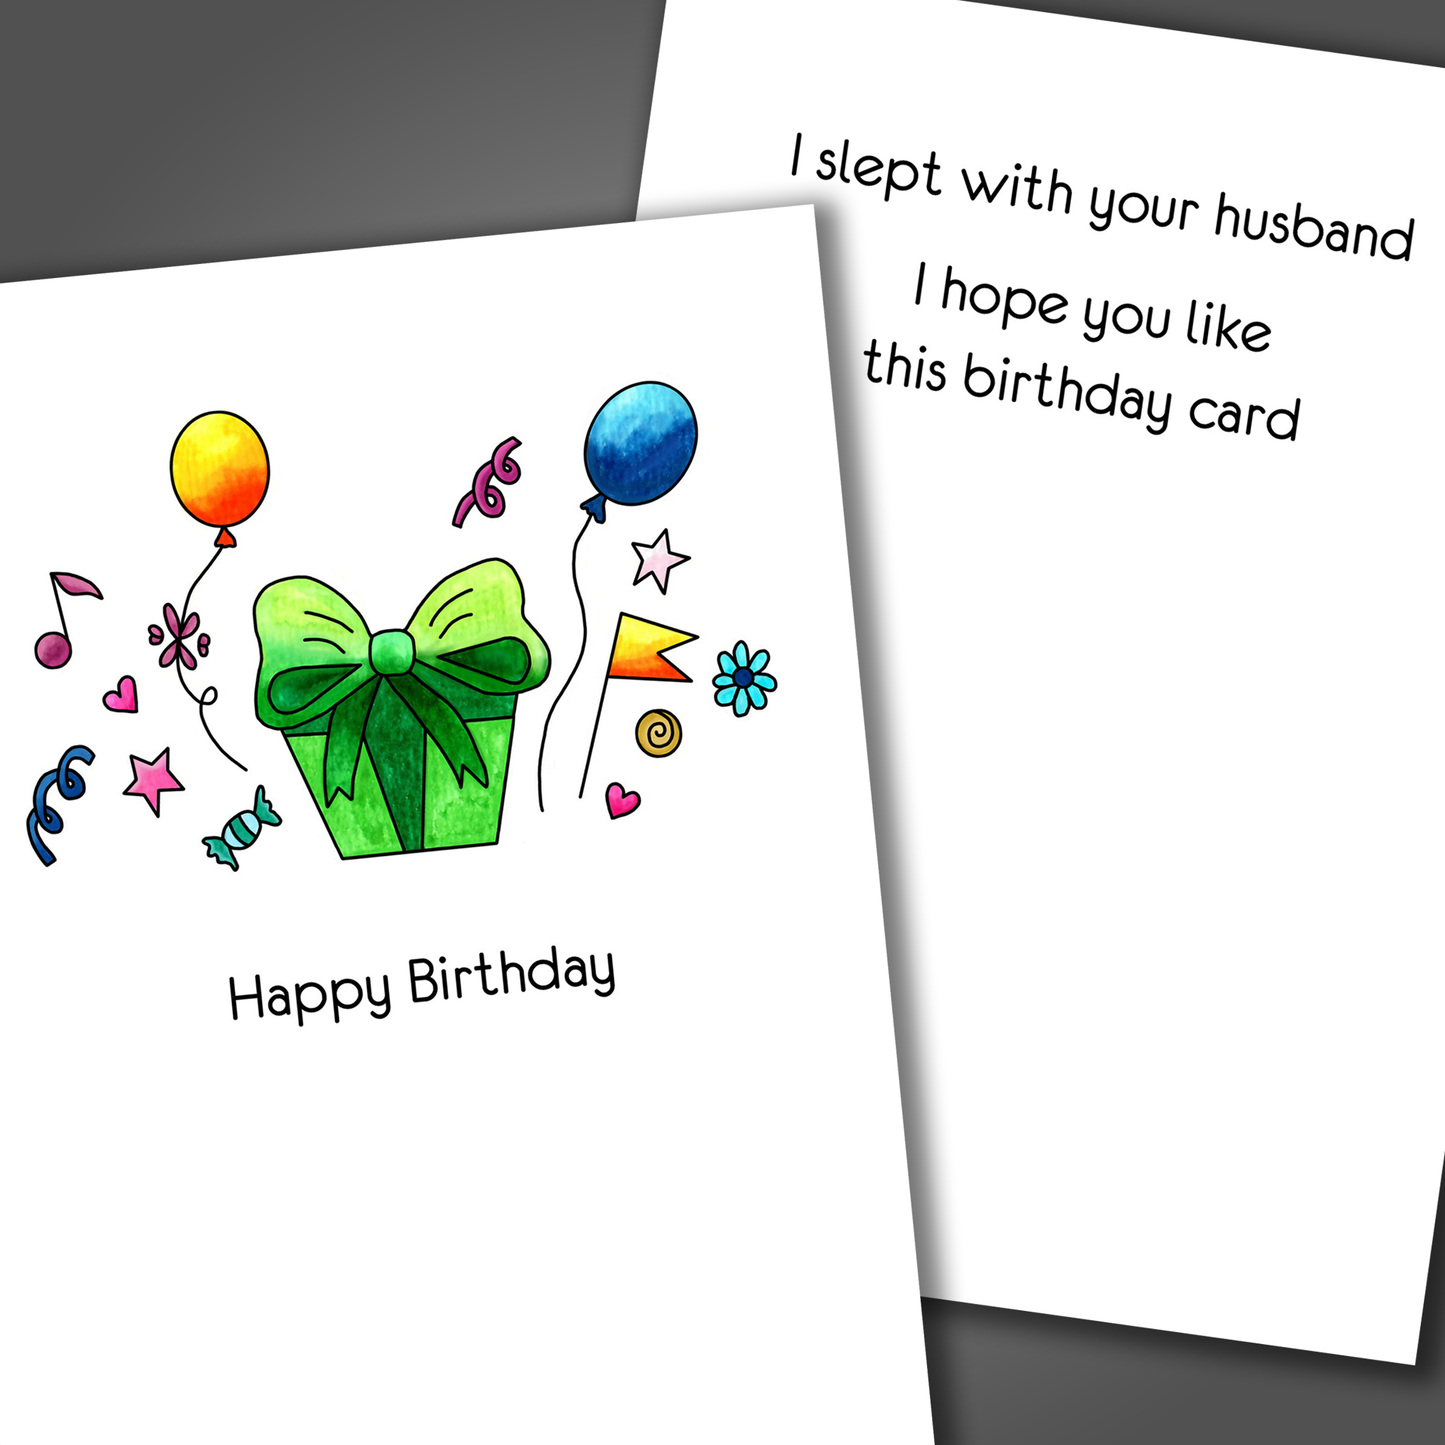 Funny adult birthday card with a green present on front of card and funny joke inside of the card that ends with happy birthday, I slept with your husband!